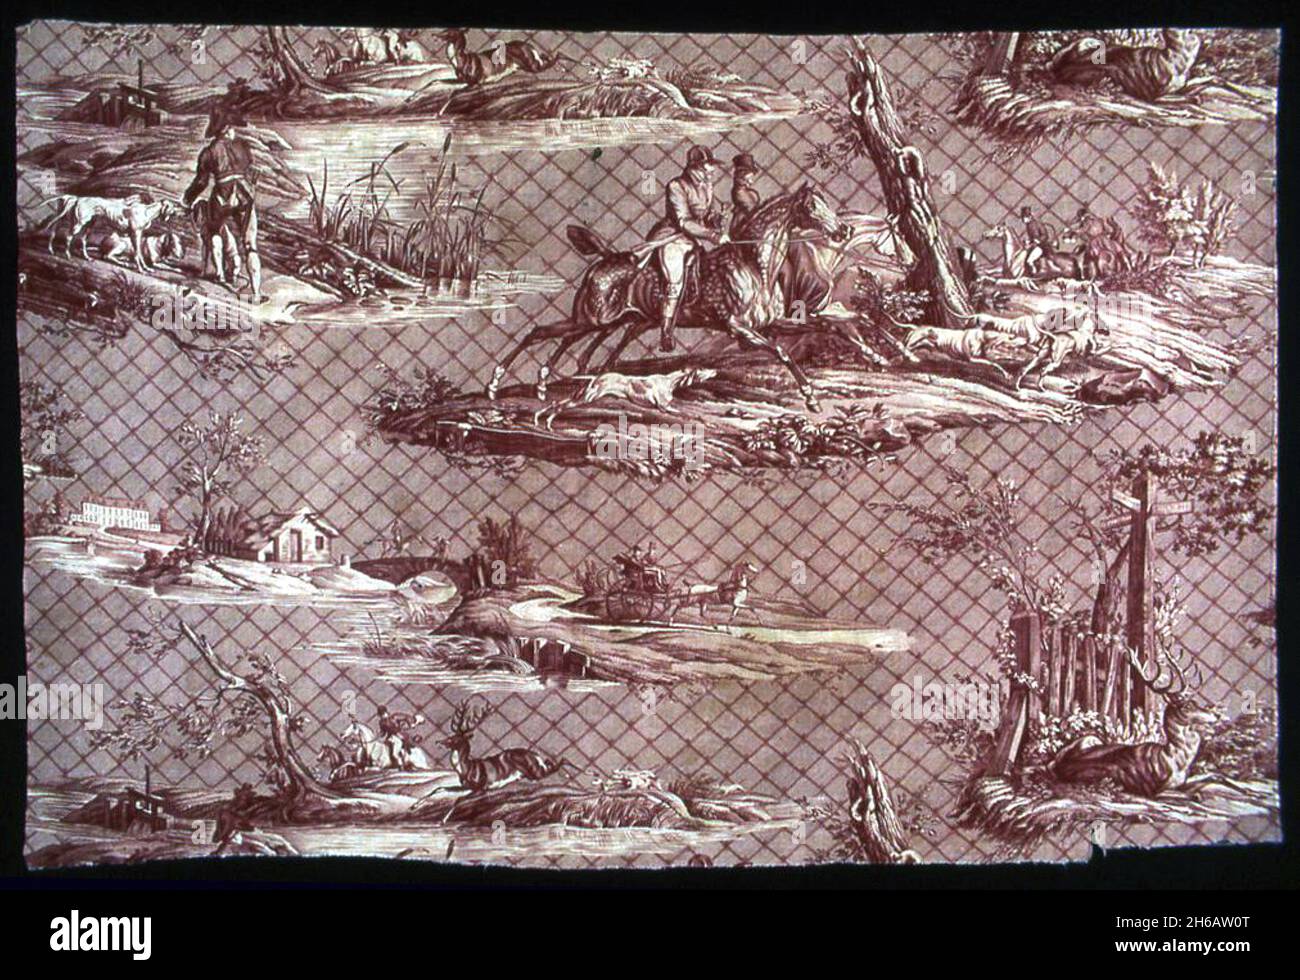 La Route de Jouy (The Route to Jouy) (Furnishing Fabric), France, 1815. Designed by Horace Vernet, engraved by Pierre Guillaime Lemeunnie, manufactured by Oberkampf Manufactory. Stock Photo